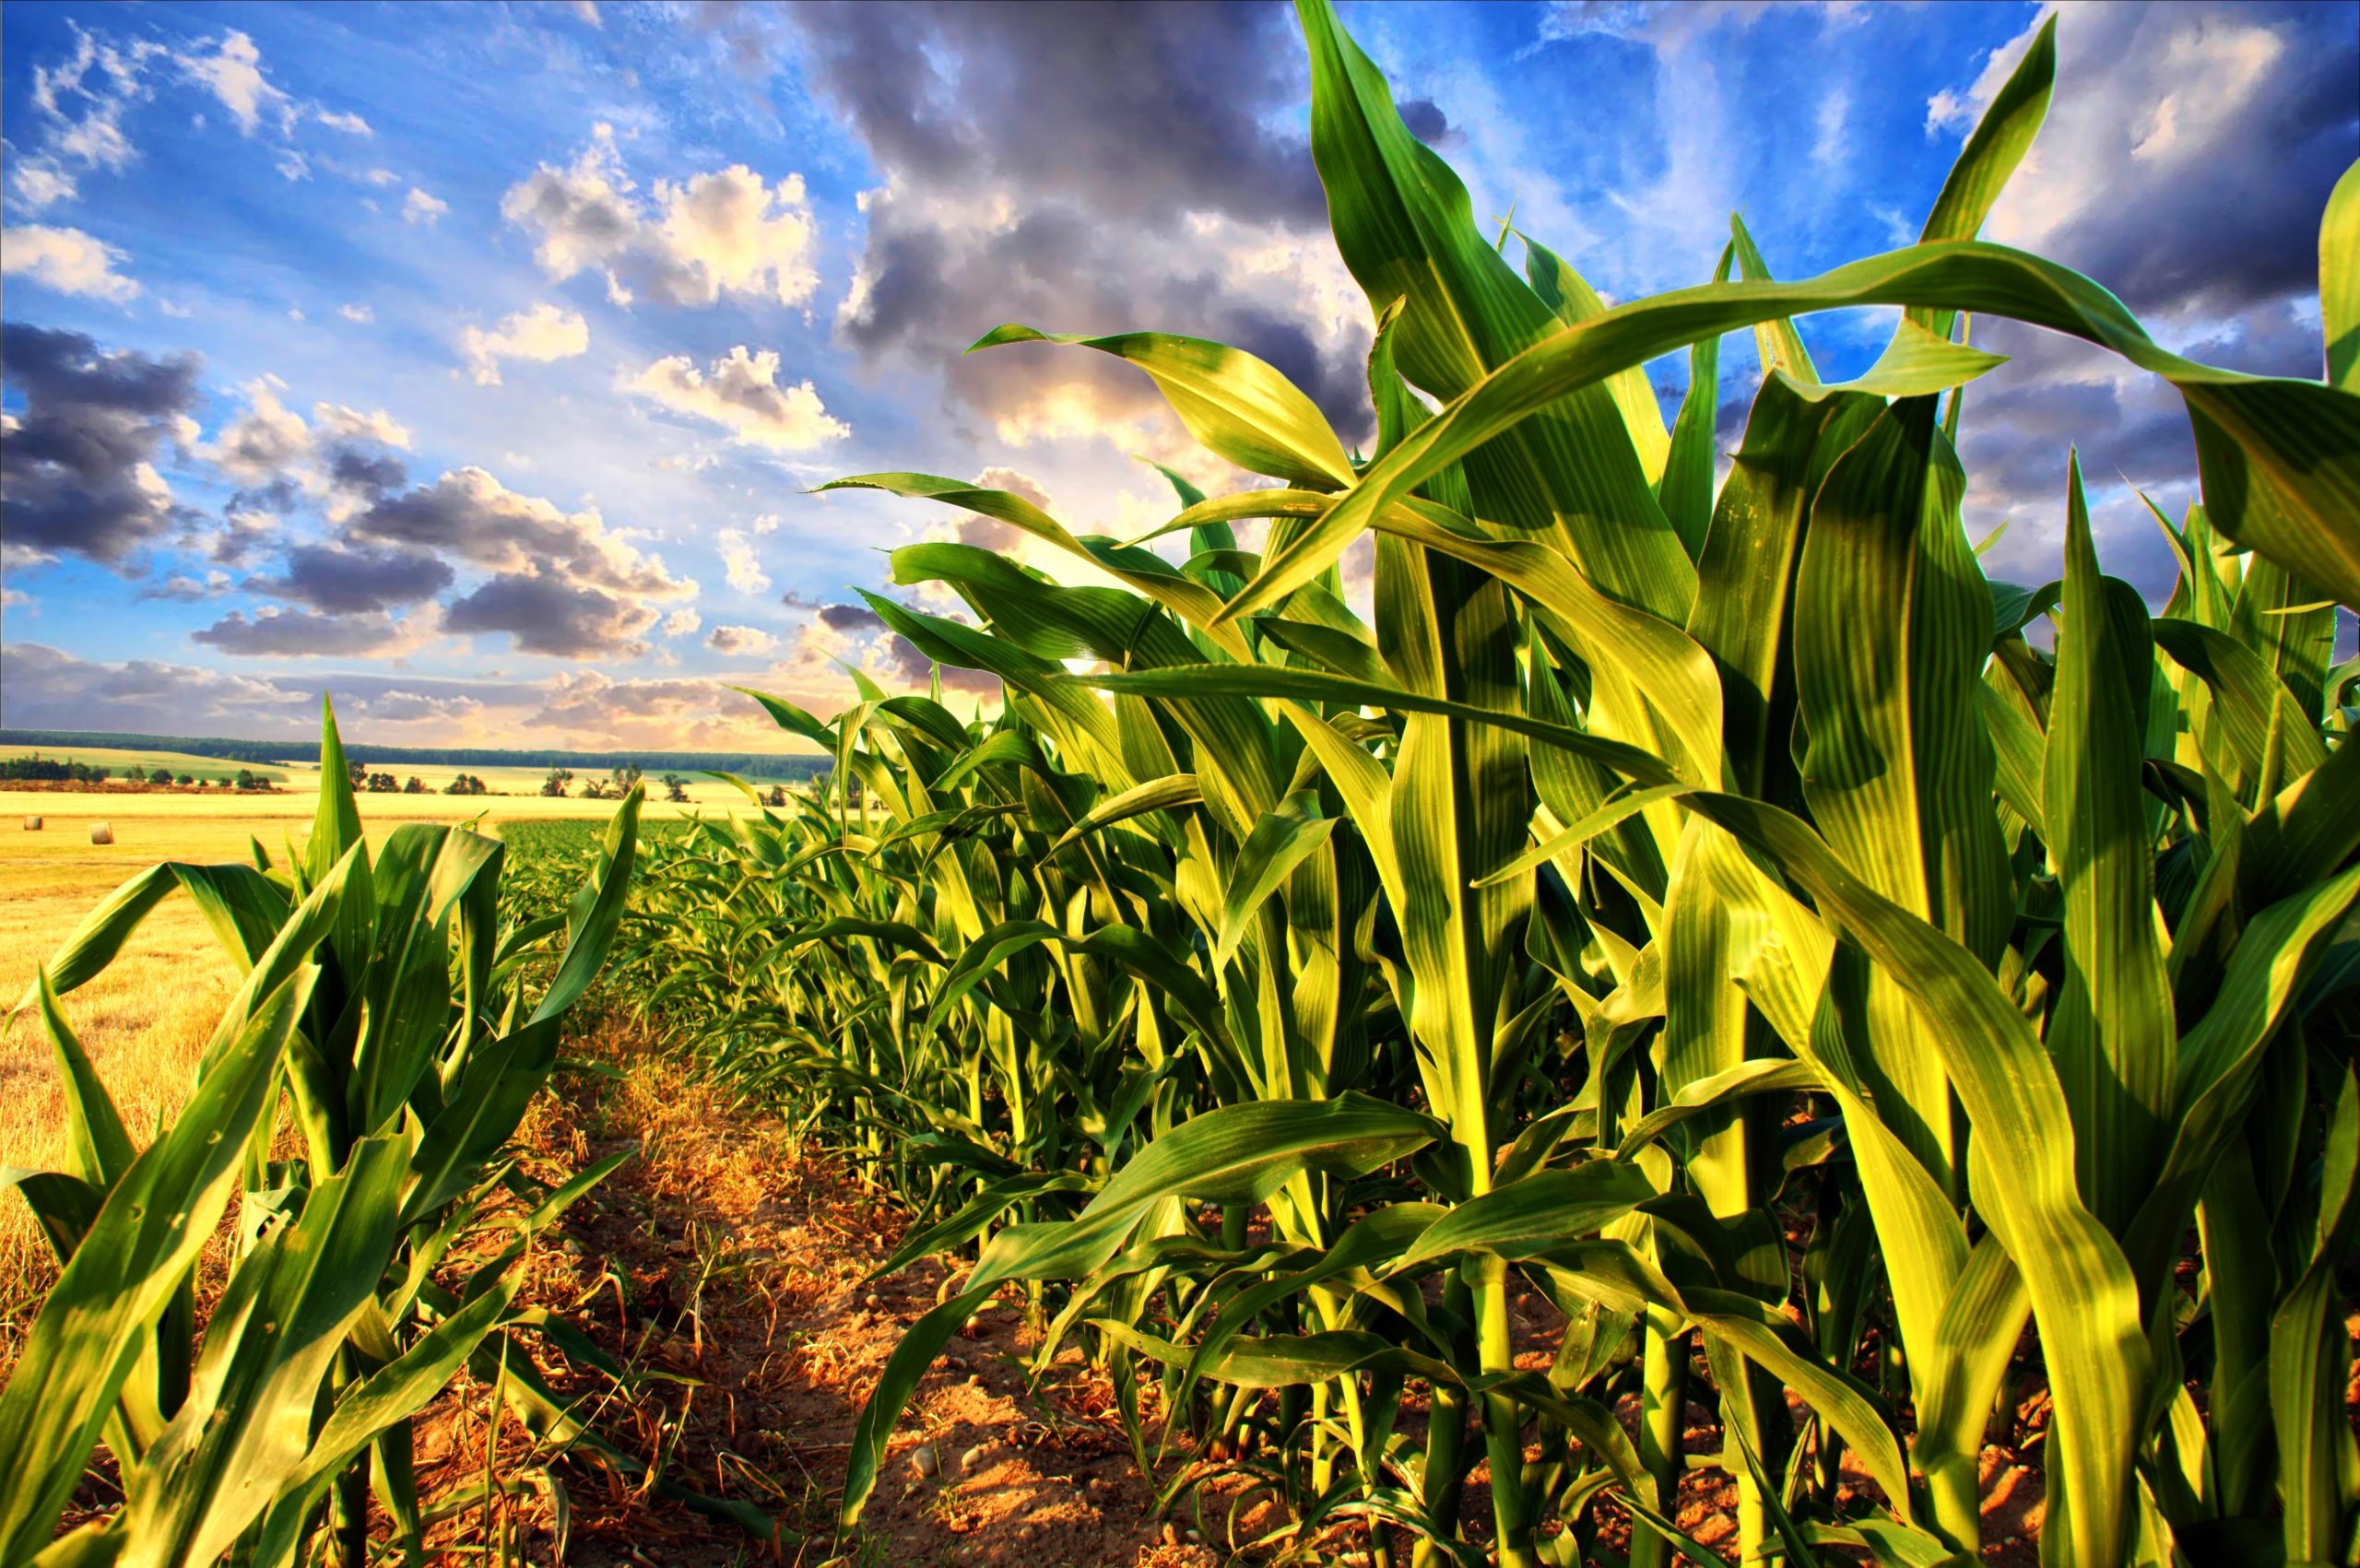 stock image of maize growing in a field